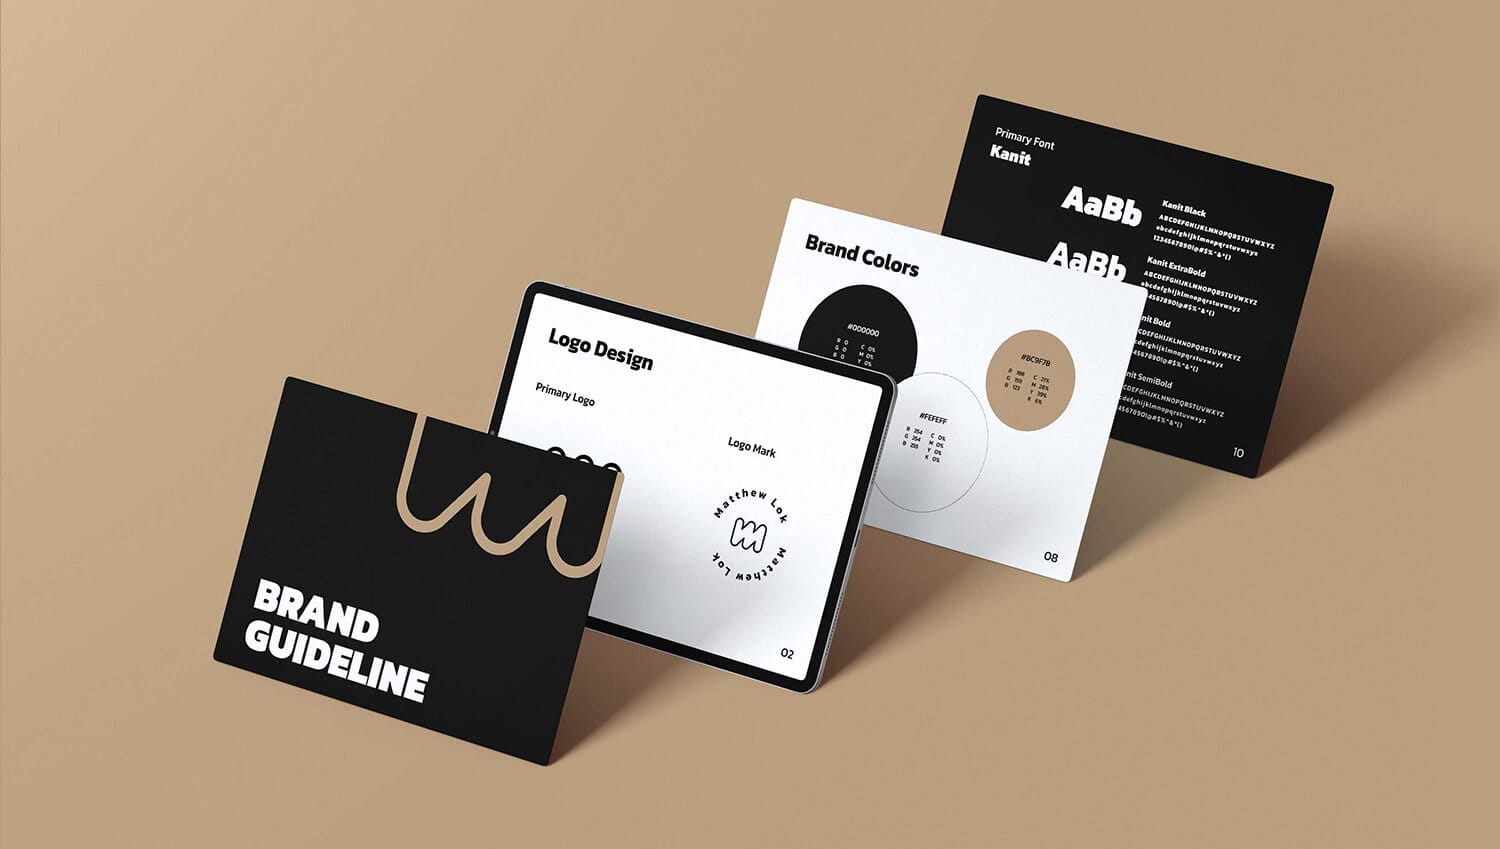 A set of black and white business cards on a beige background.